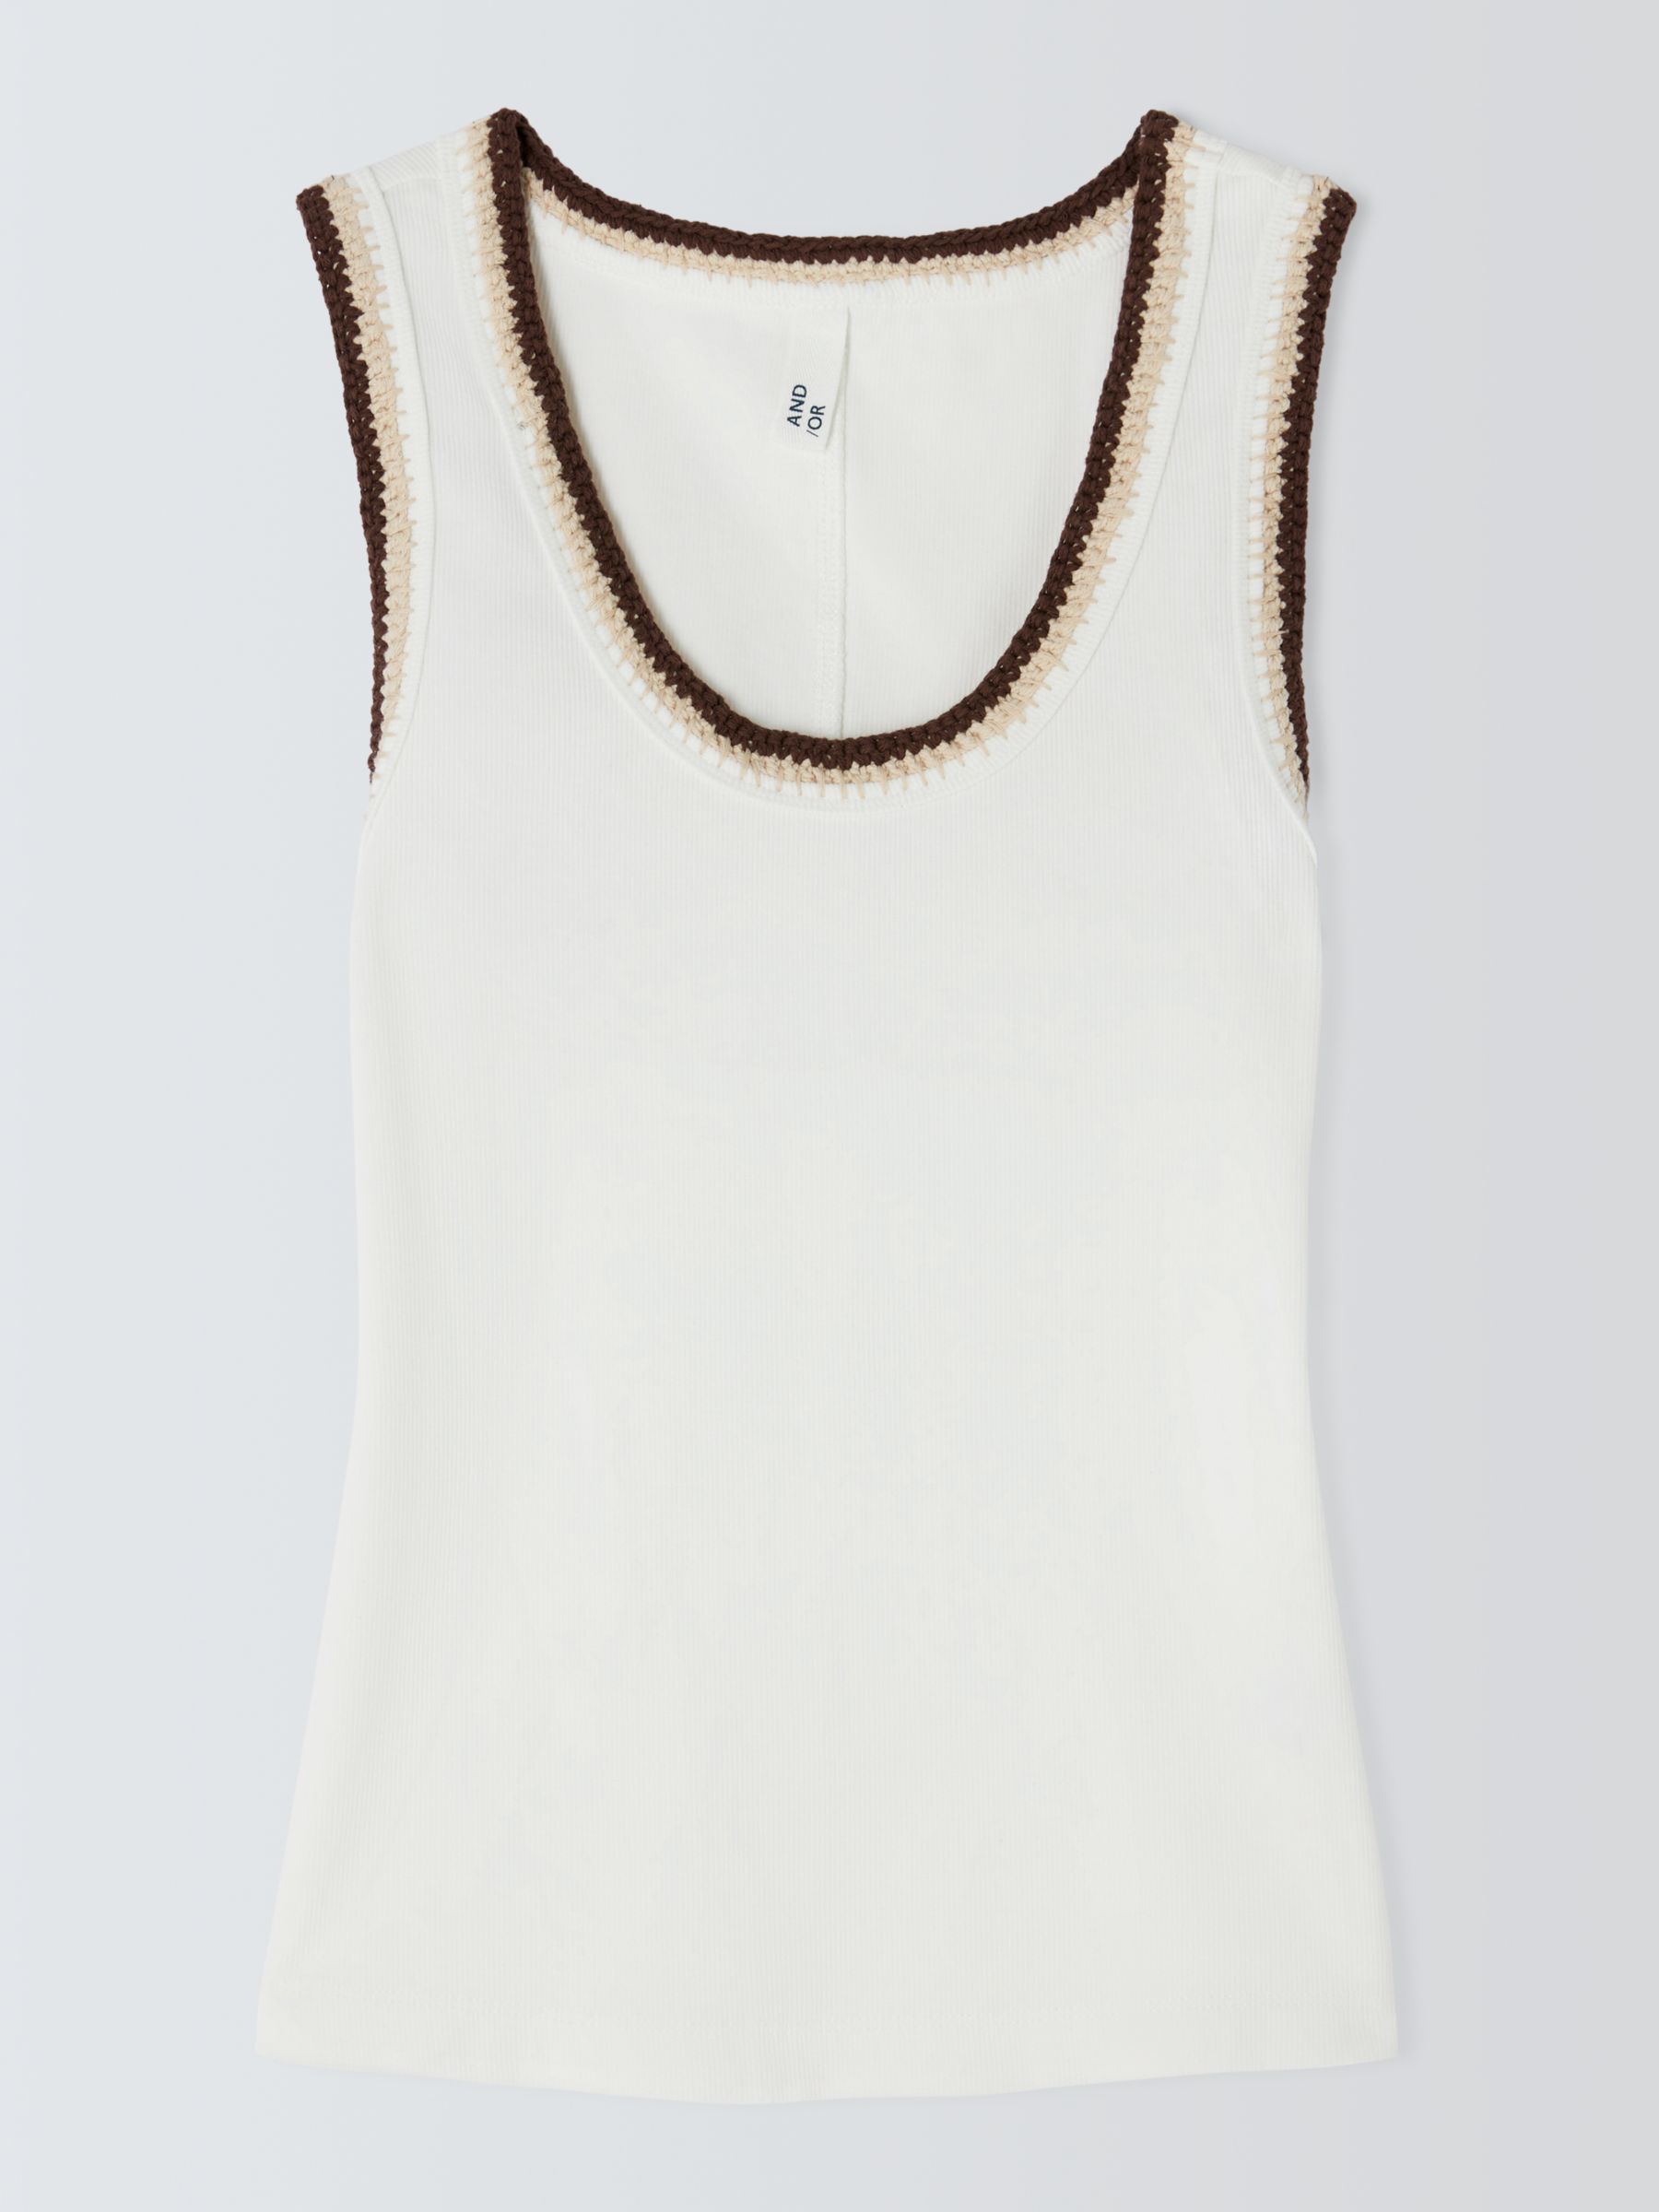 AND/OR Dari Embroidered Vest Top, White, 6